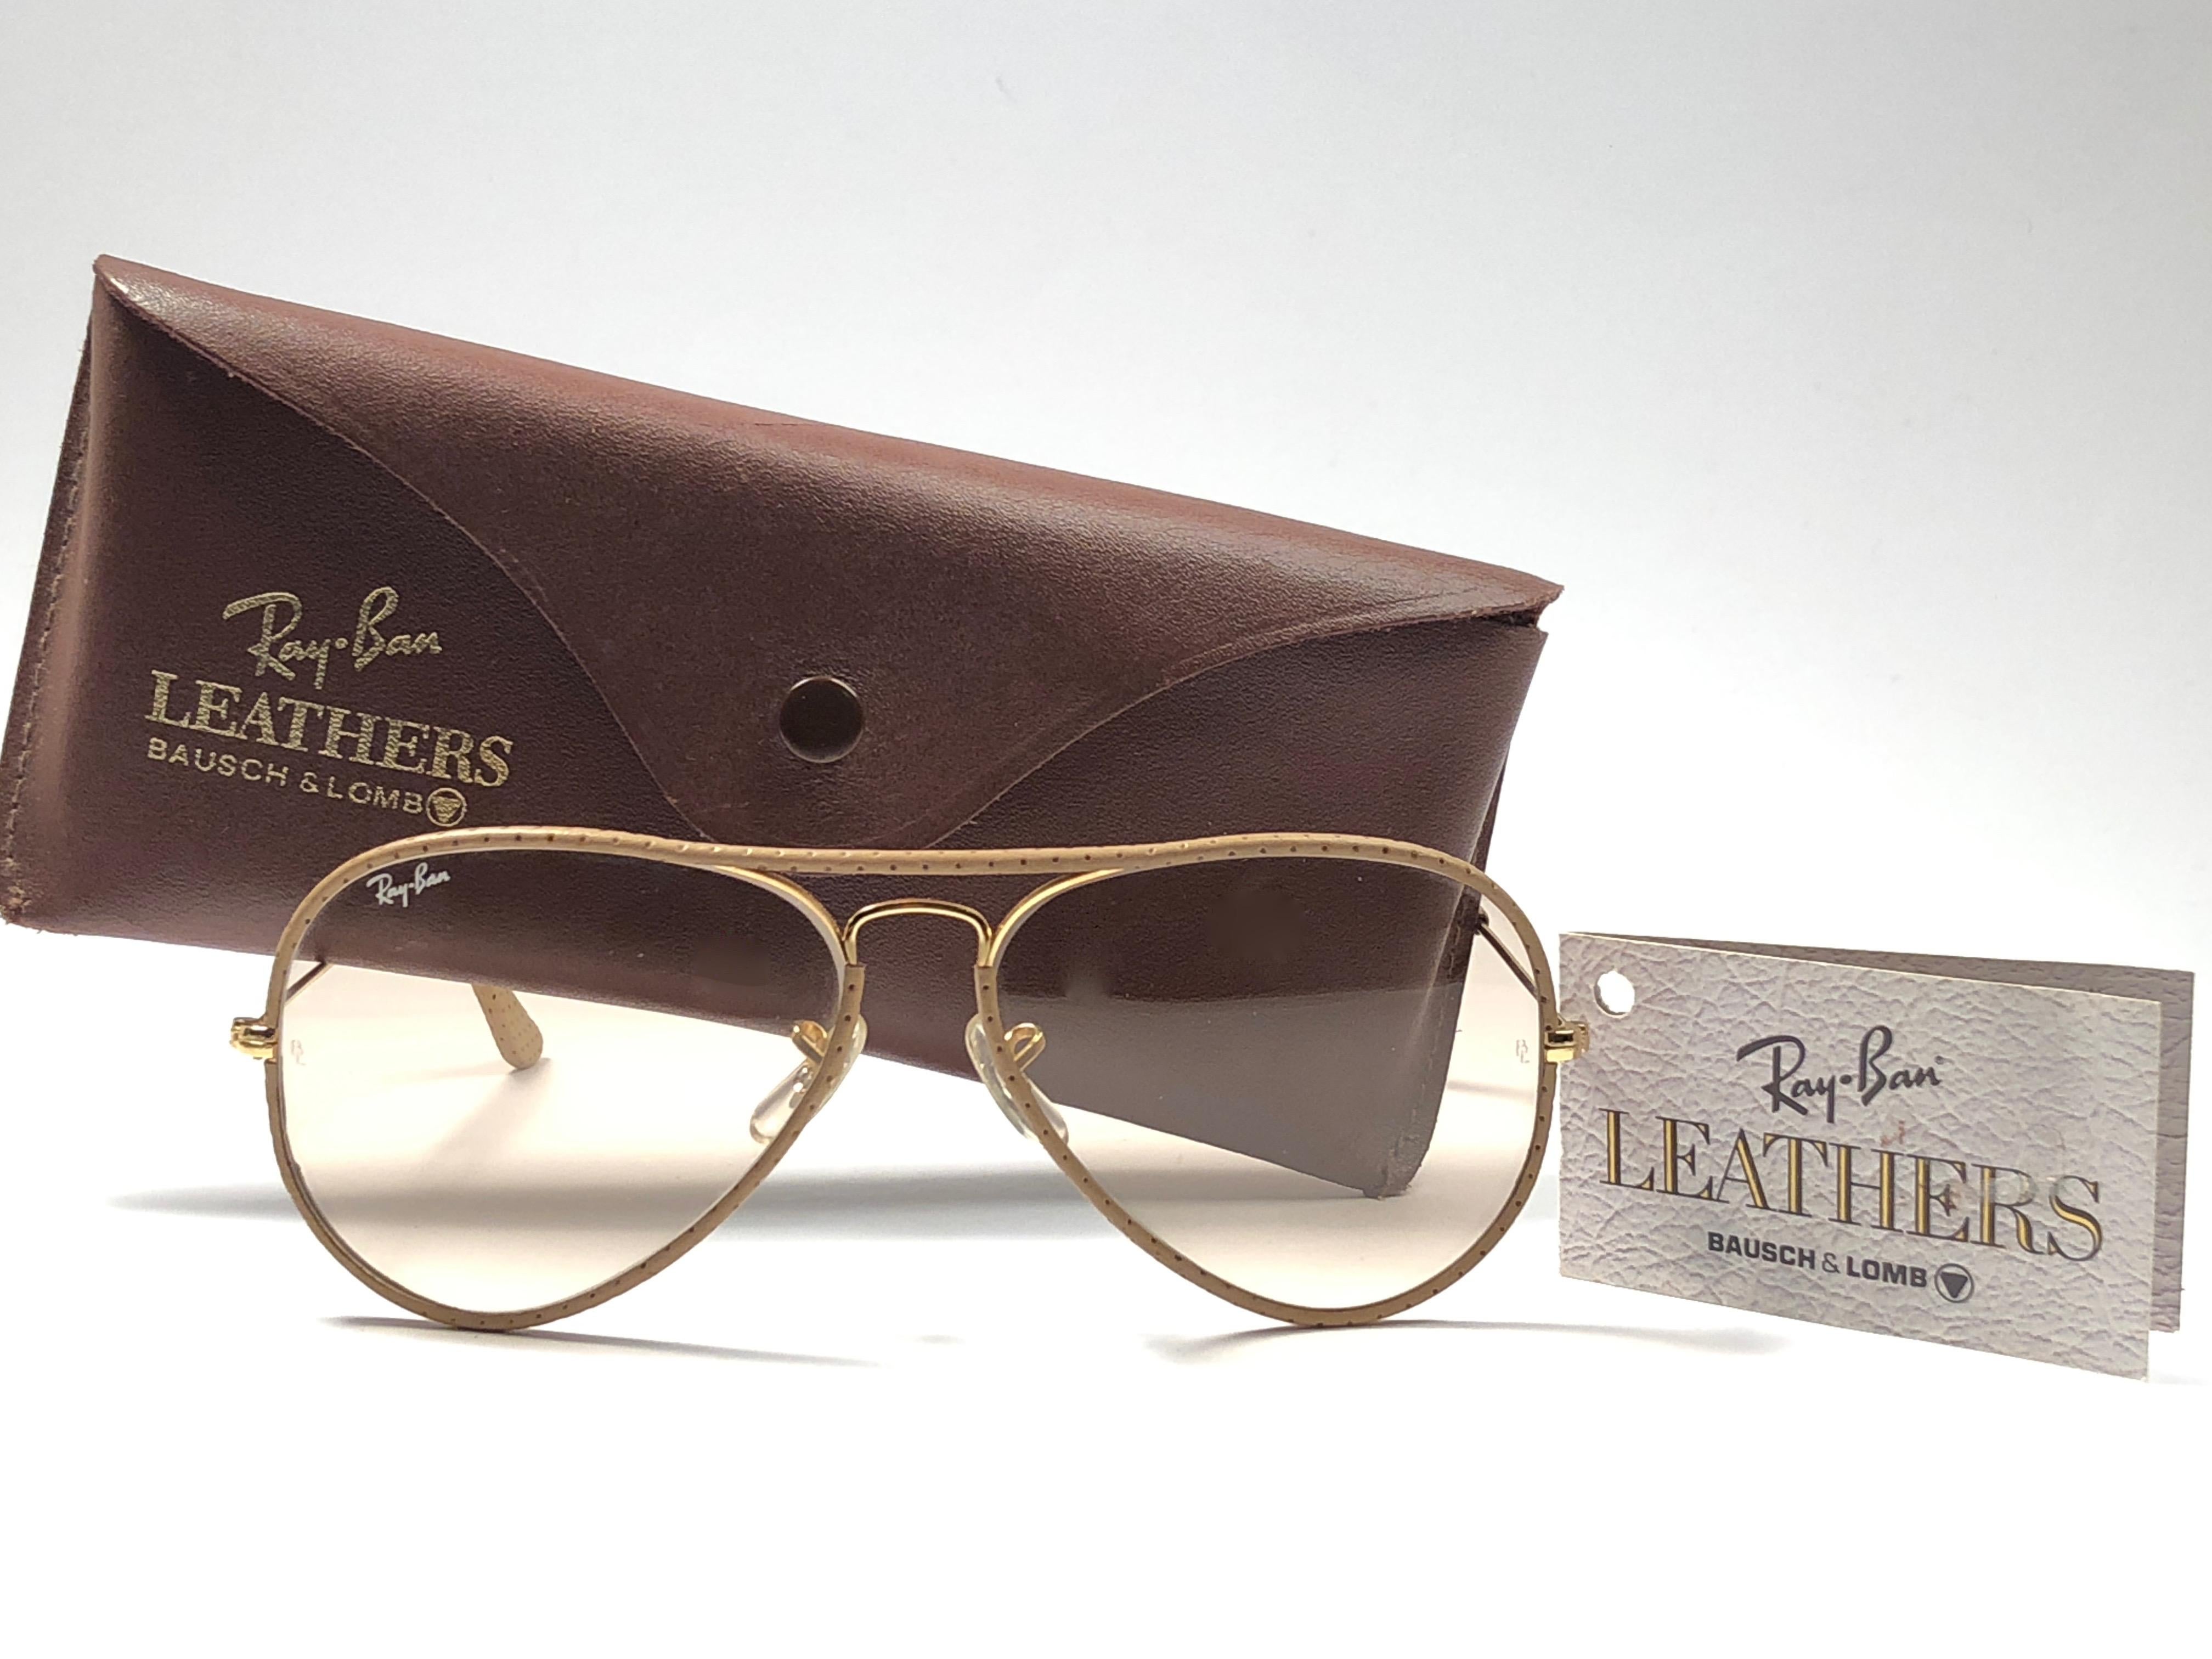 New Vintage Ray Ban Leathers 58mm in tan perforated leather with gold metal combination frame sporting brown changeable lenses.

Comes with its original Ray Ban B&L case with minor sign of wear due to storage. 
Rare and hard to find in this new,